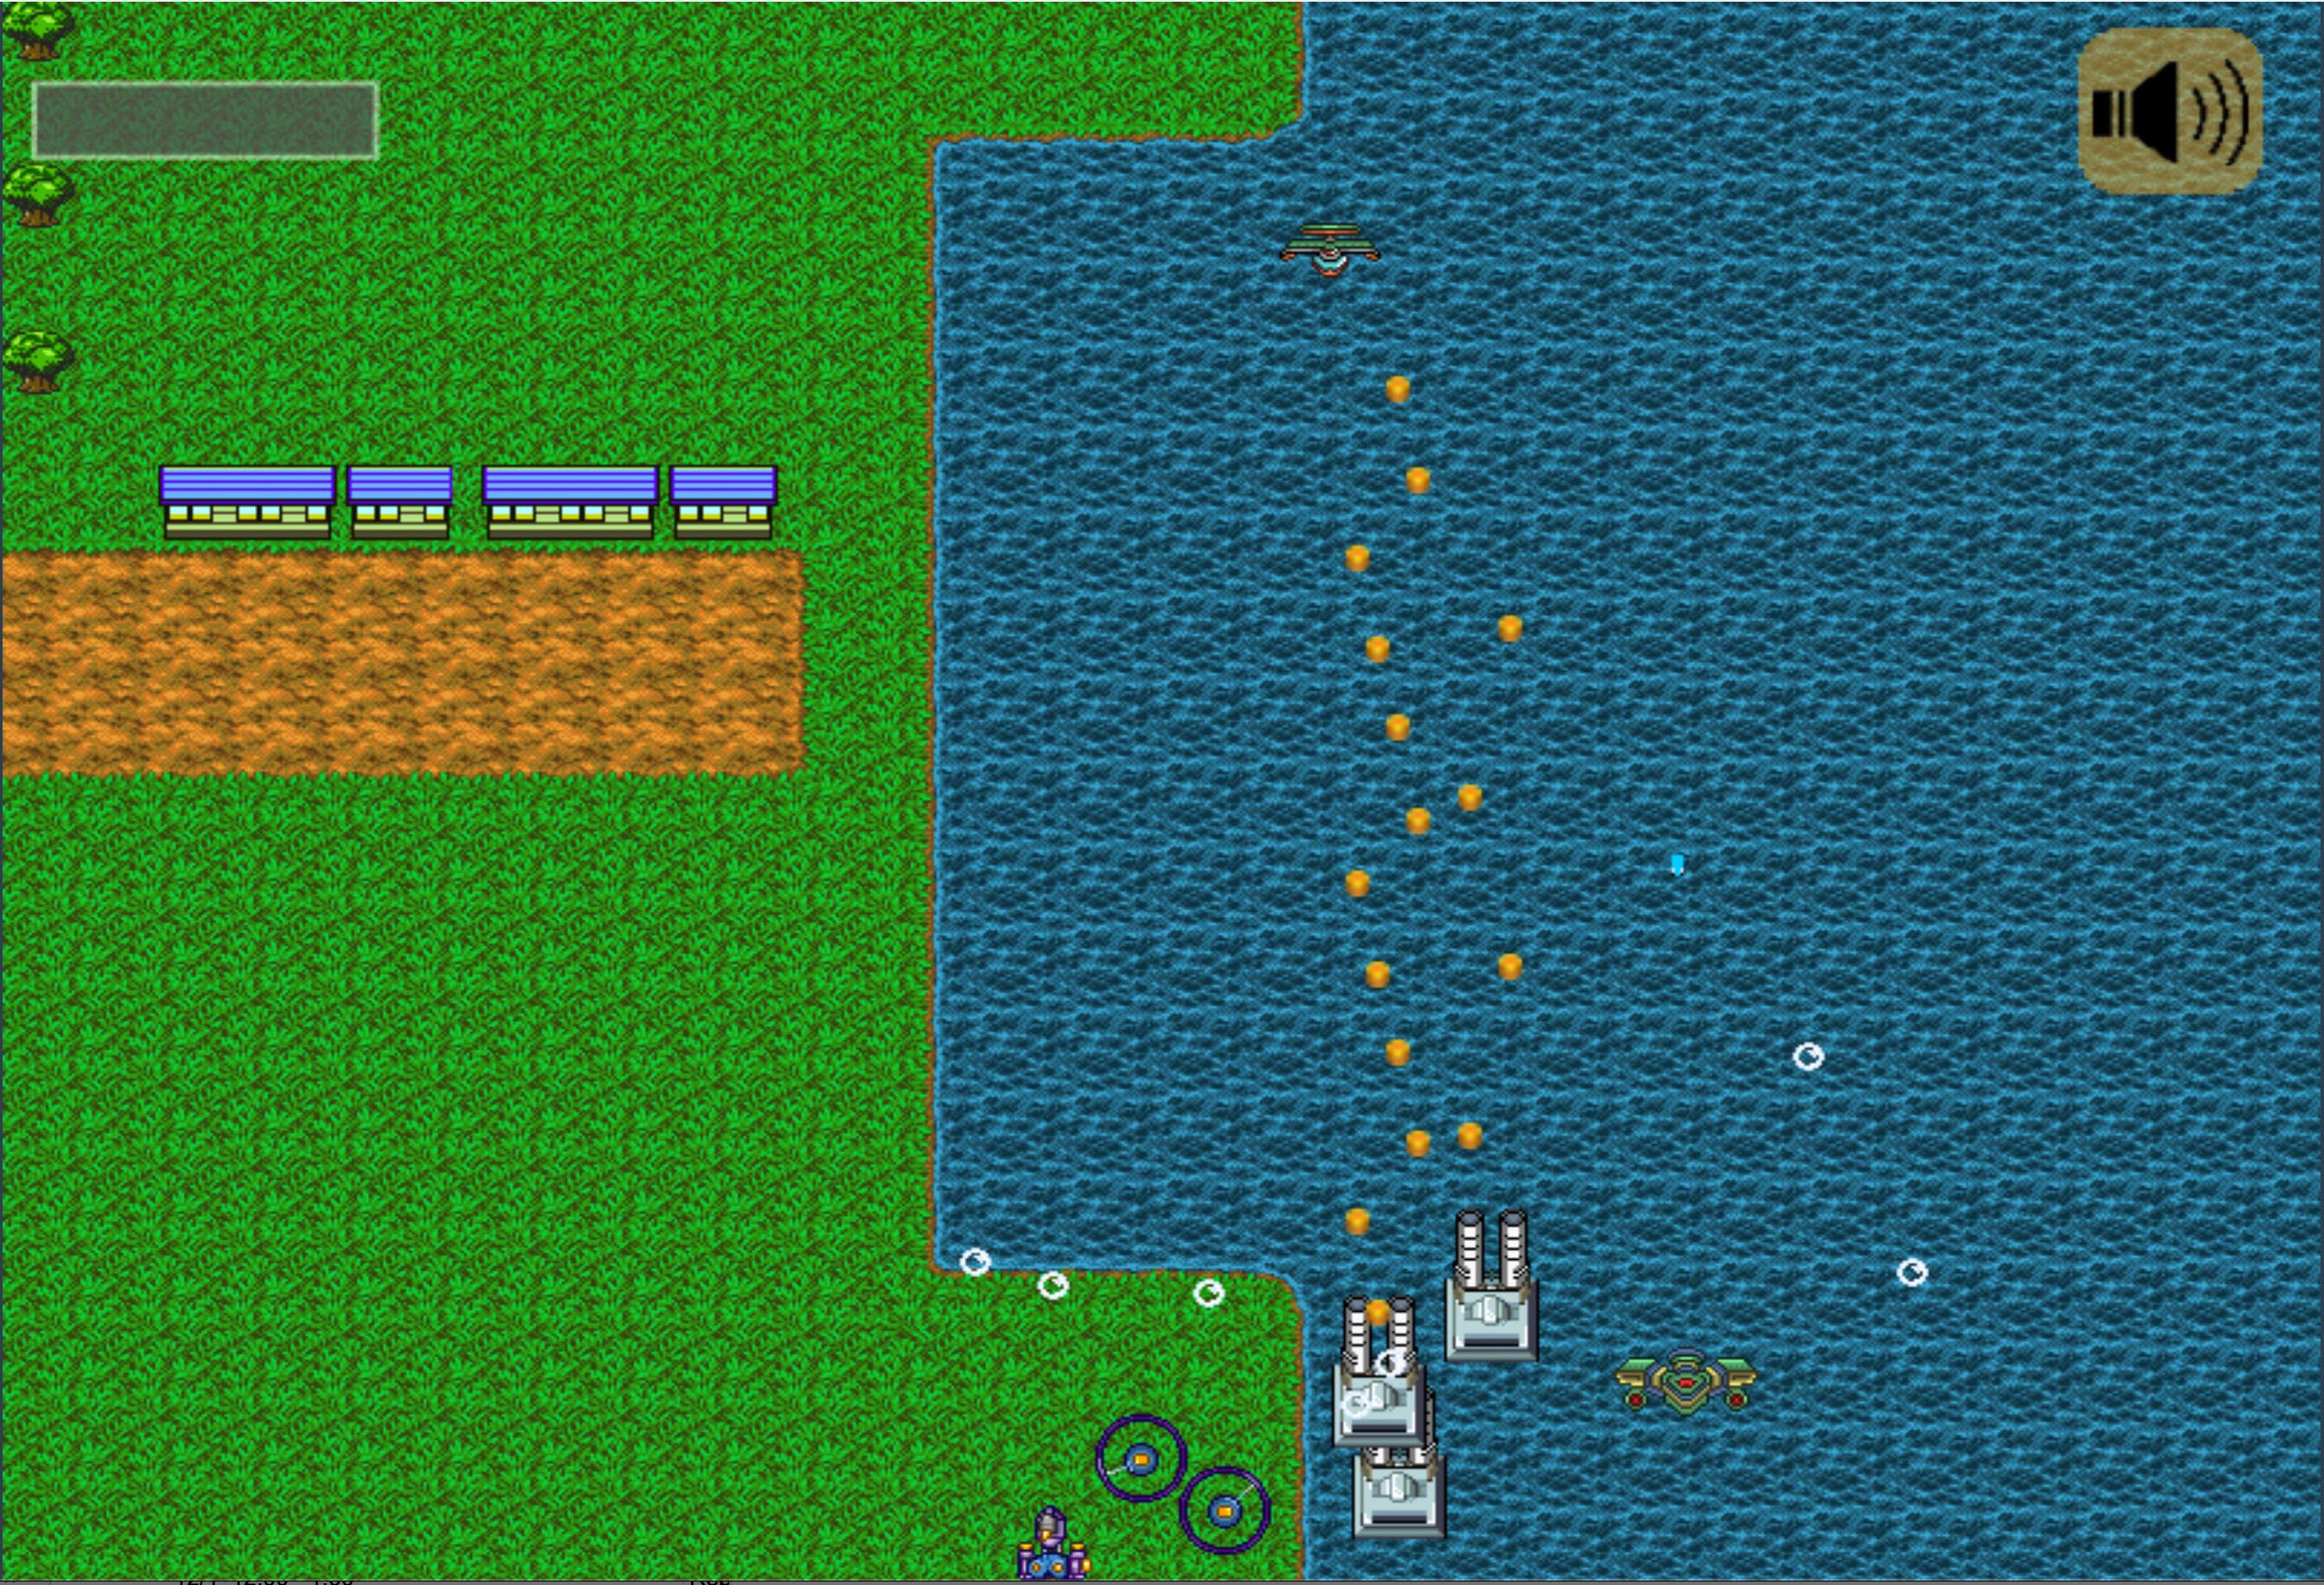 This is a screenshot from Viewpoint Pilot. The player is dropping automated cannons on a grassy plane.